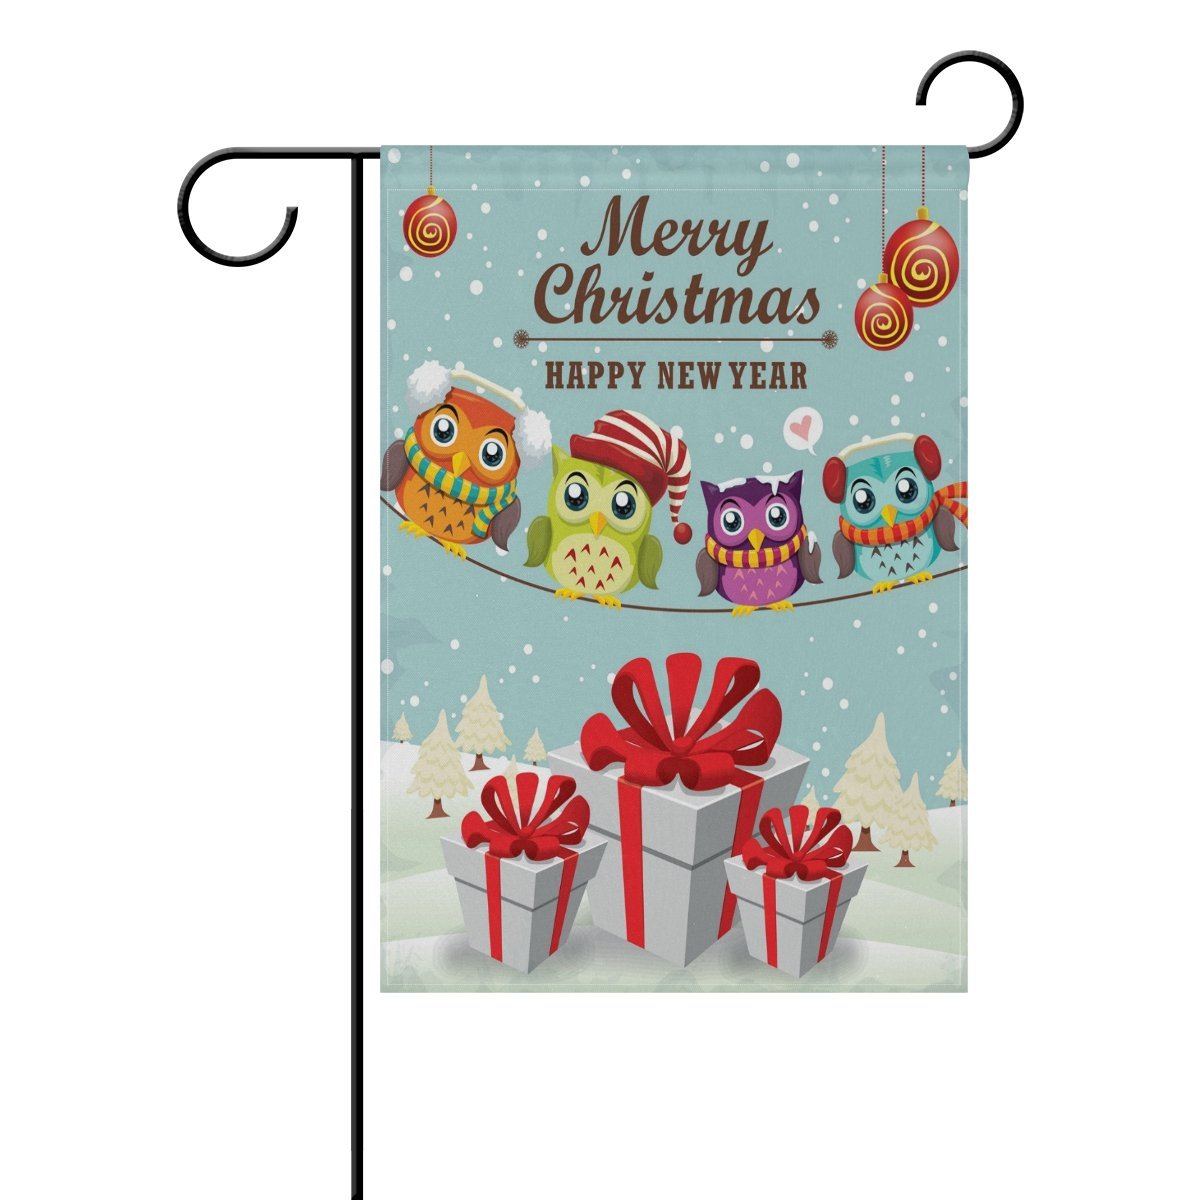 POPCreation Vintage Christmas Poster Design With Owl Polyester Garden Flag Outdoor Flag Home Party Garden Decor 12x18 inches - image 1 of 2